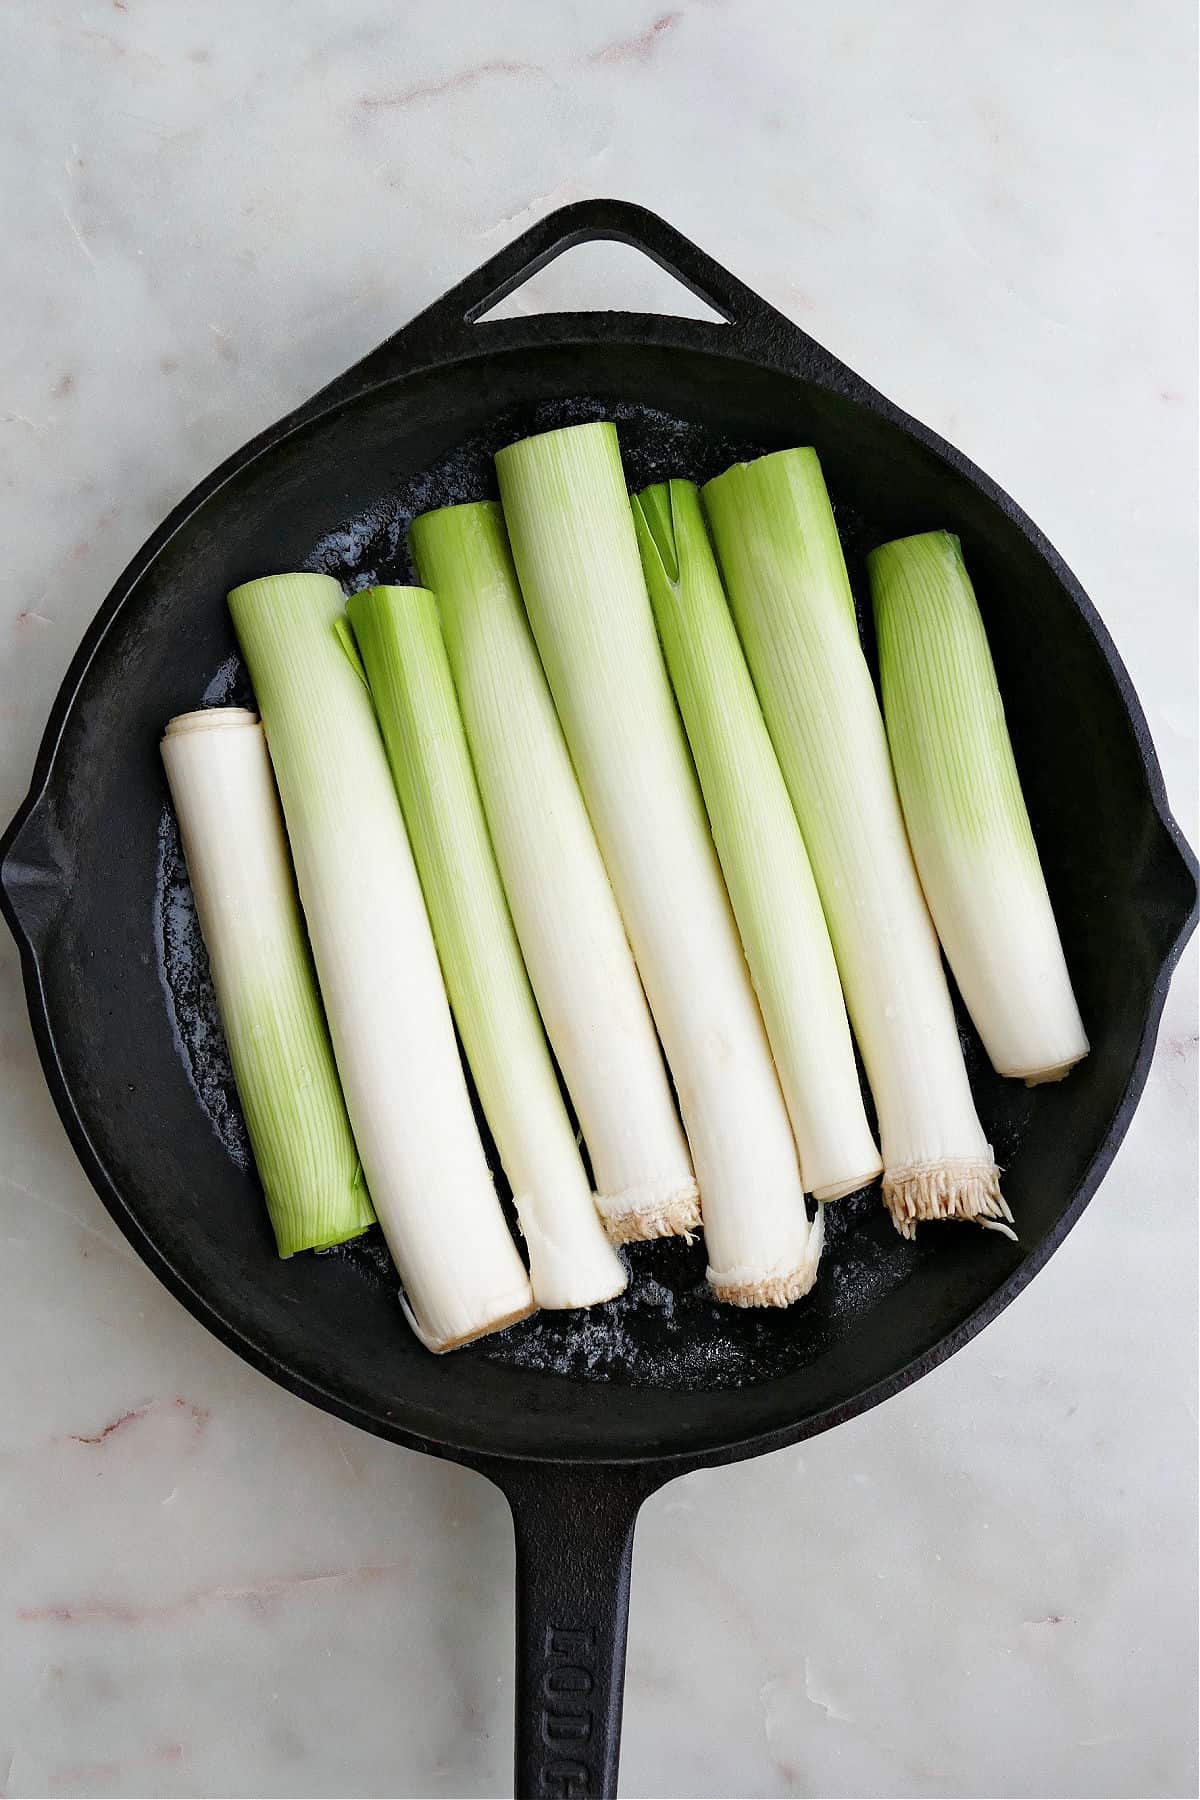 leeks sliced lengthwise snuggled next to each other in a cast iron skillet